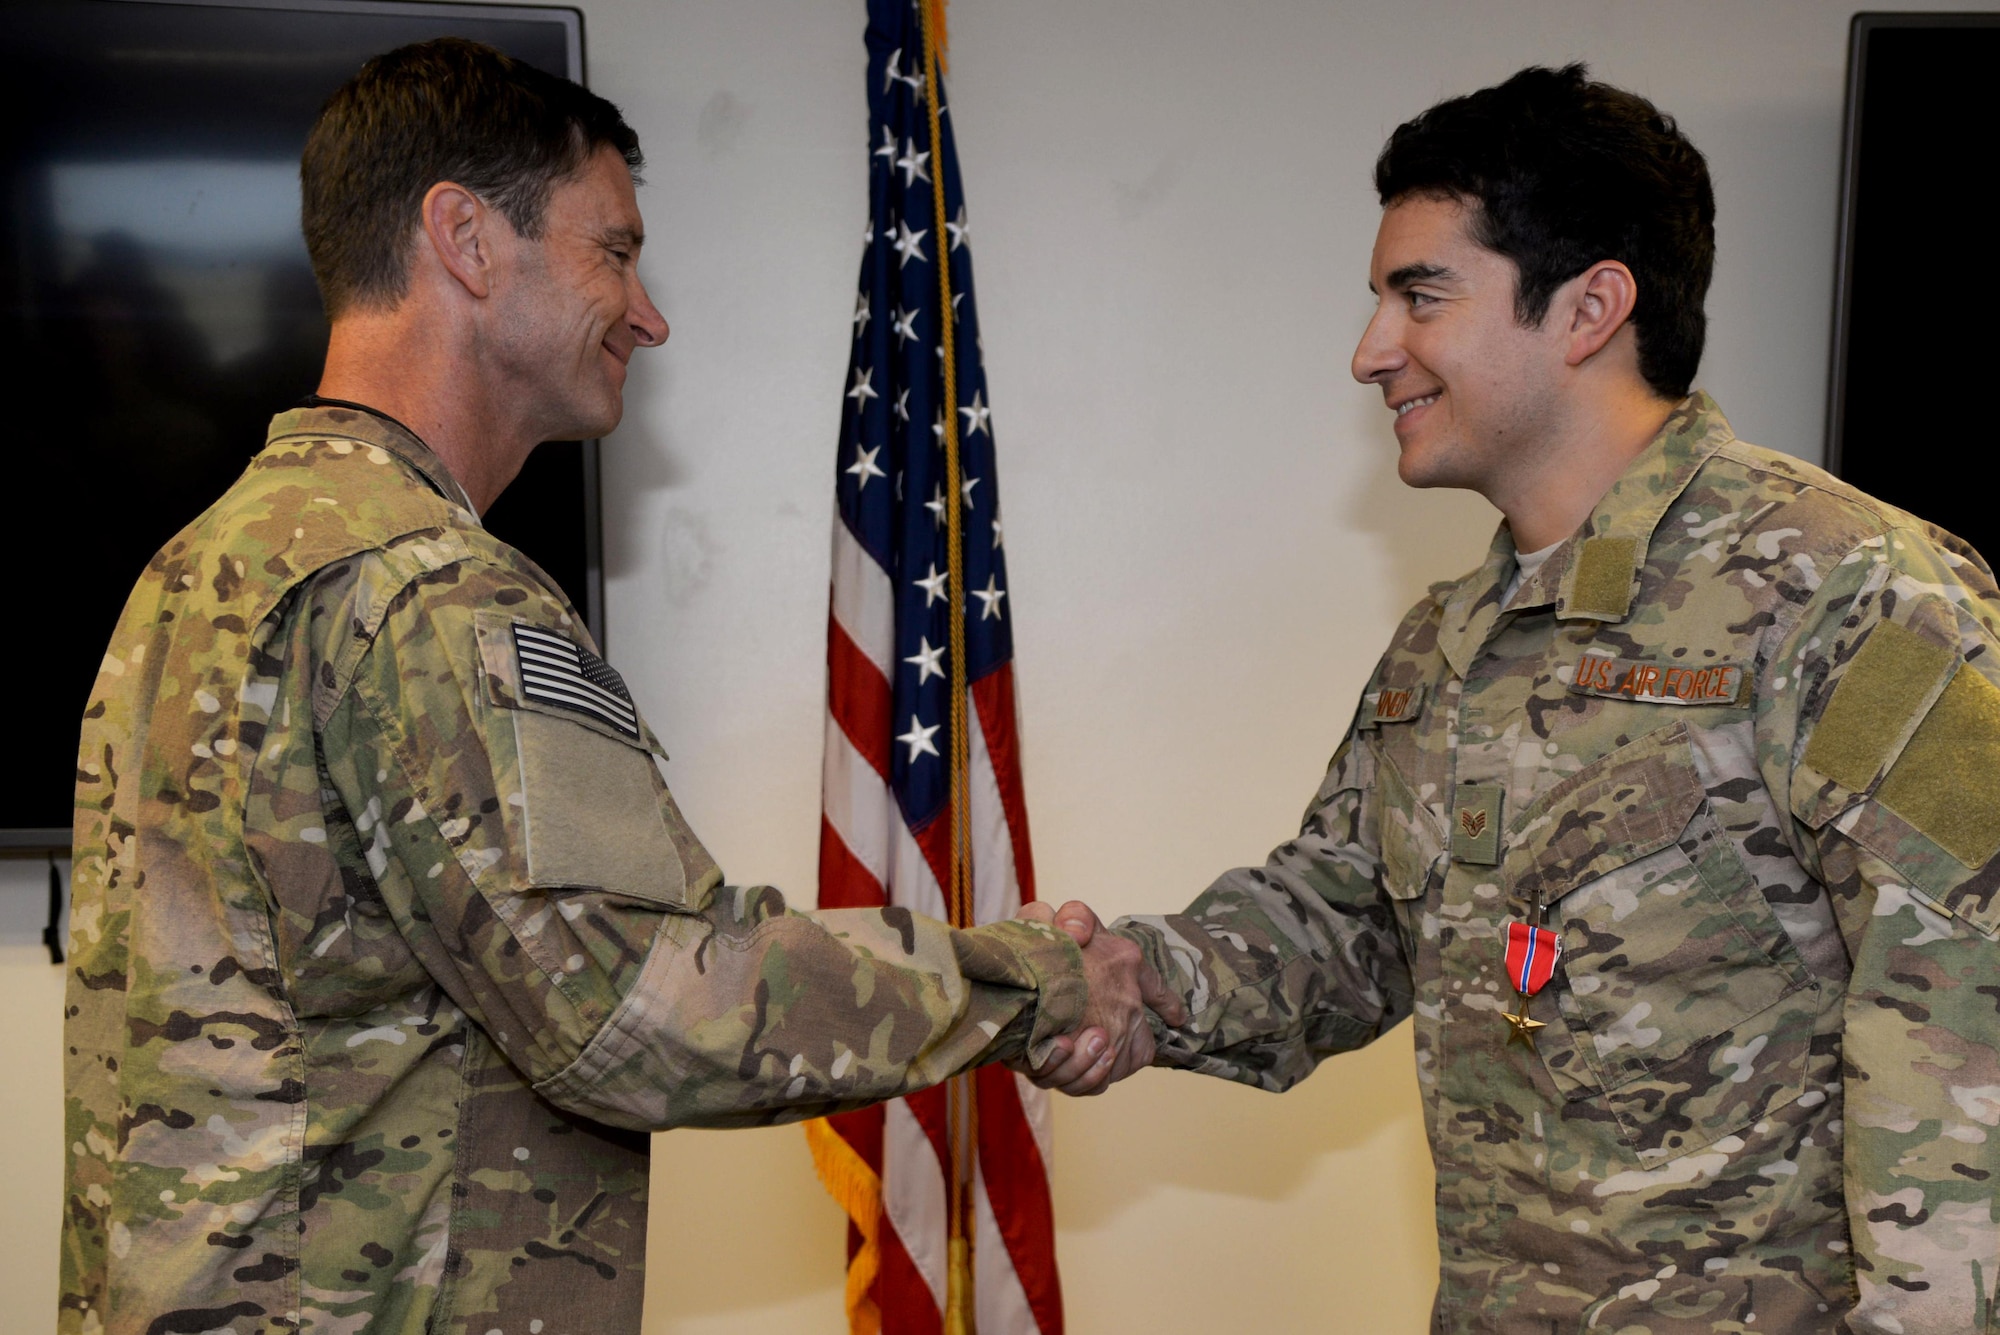 U.S. Air Force Col. Matthew Smith, left, 352d Special Operations Wing commander, pins the Bronze Star Medal on U.S. Air Force Staff Sgt. Clinton Kennedy, right, 321st Special Tactic Squadron, June 27, 2017, on RAF Mildenhall, England. While deployed, Kennedy exhibited meritorious service during combat operations, thus earning the Bronze Star Medal. (U.S. Air Force photo by Airman 1st Class Tenley Long)